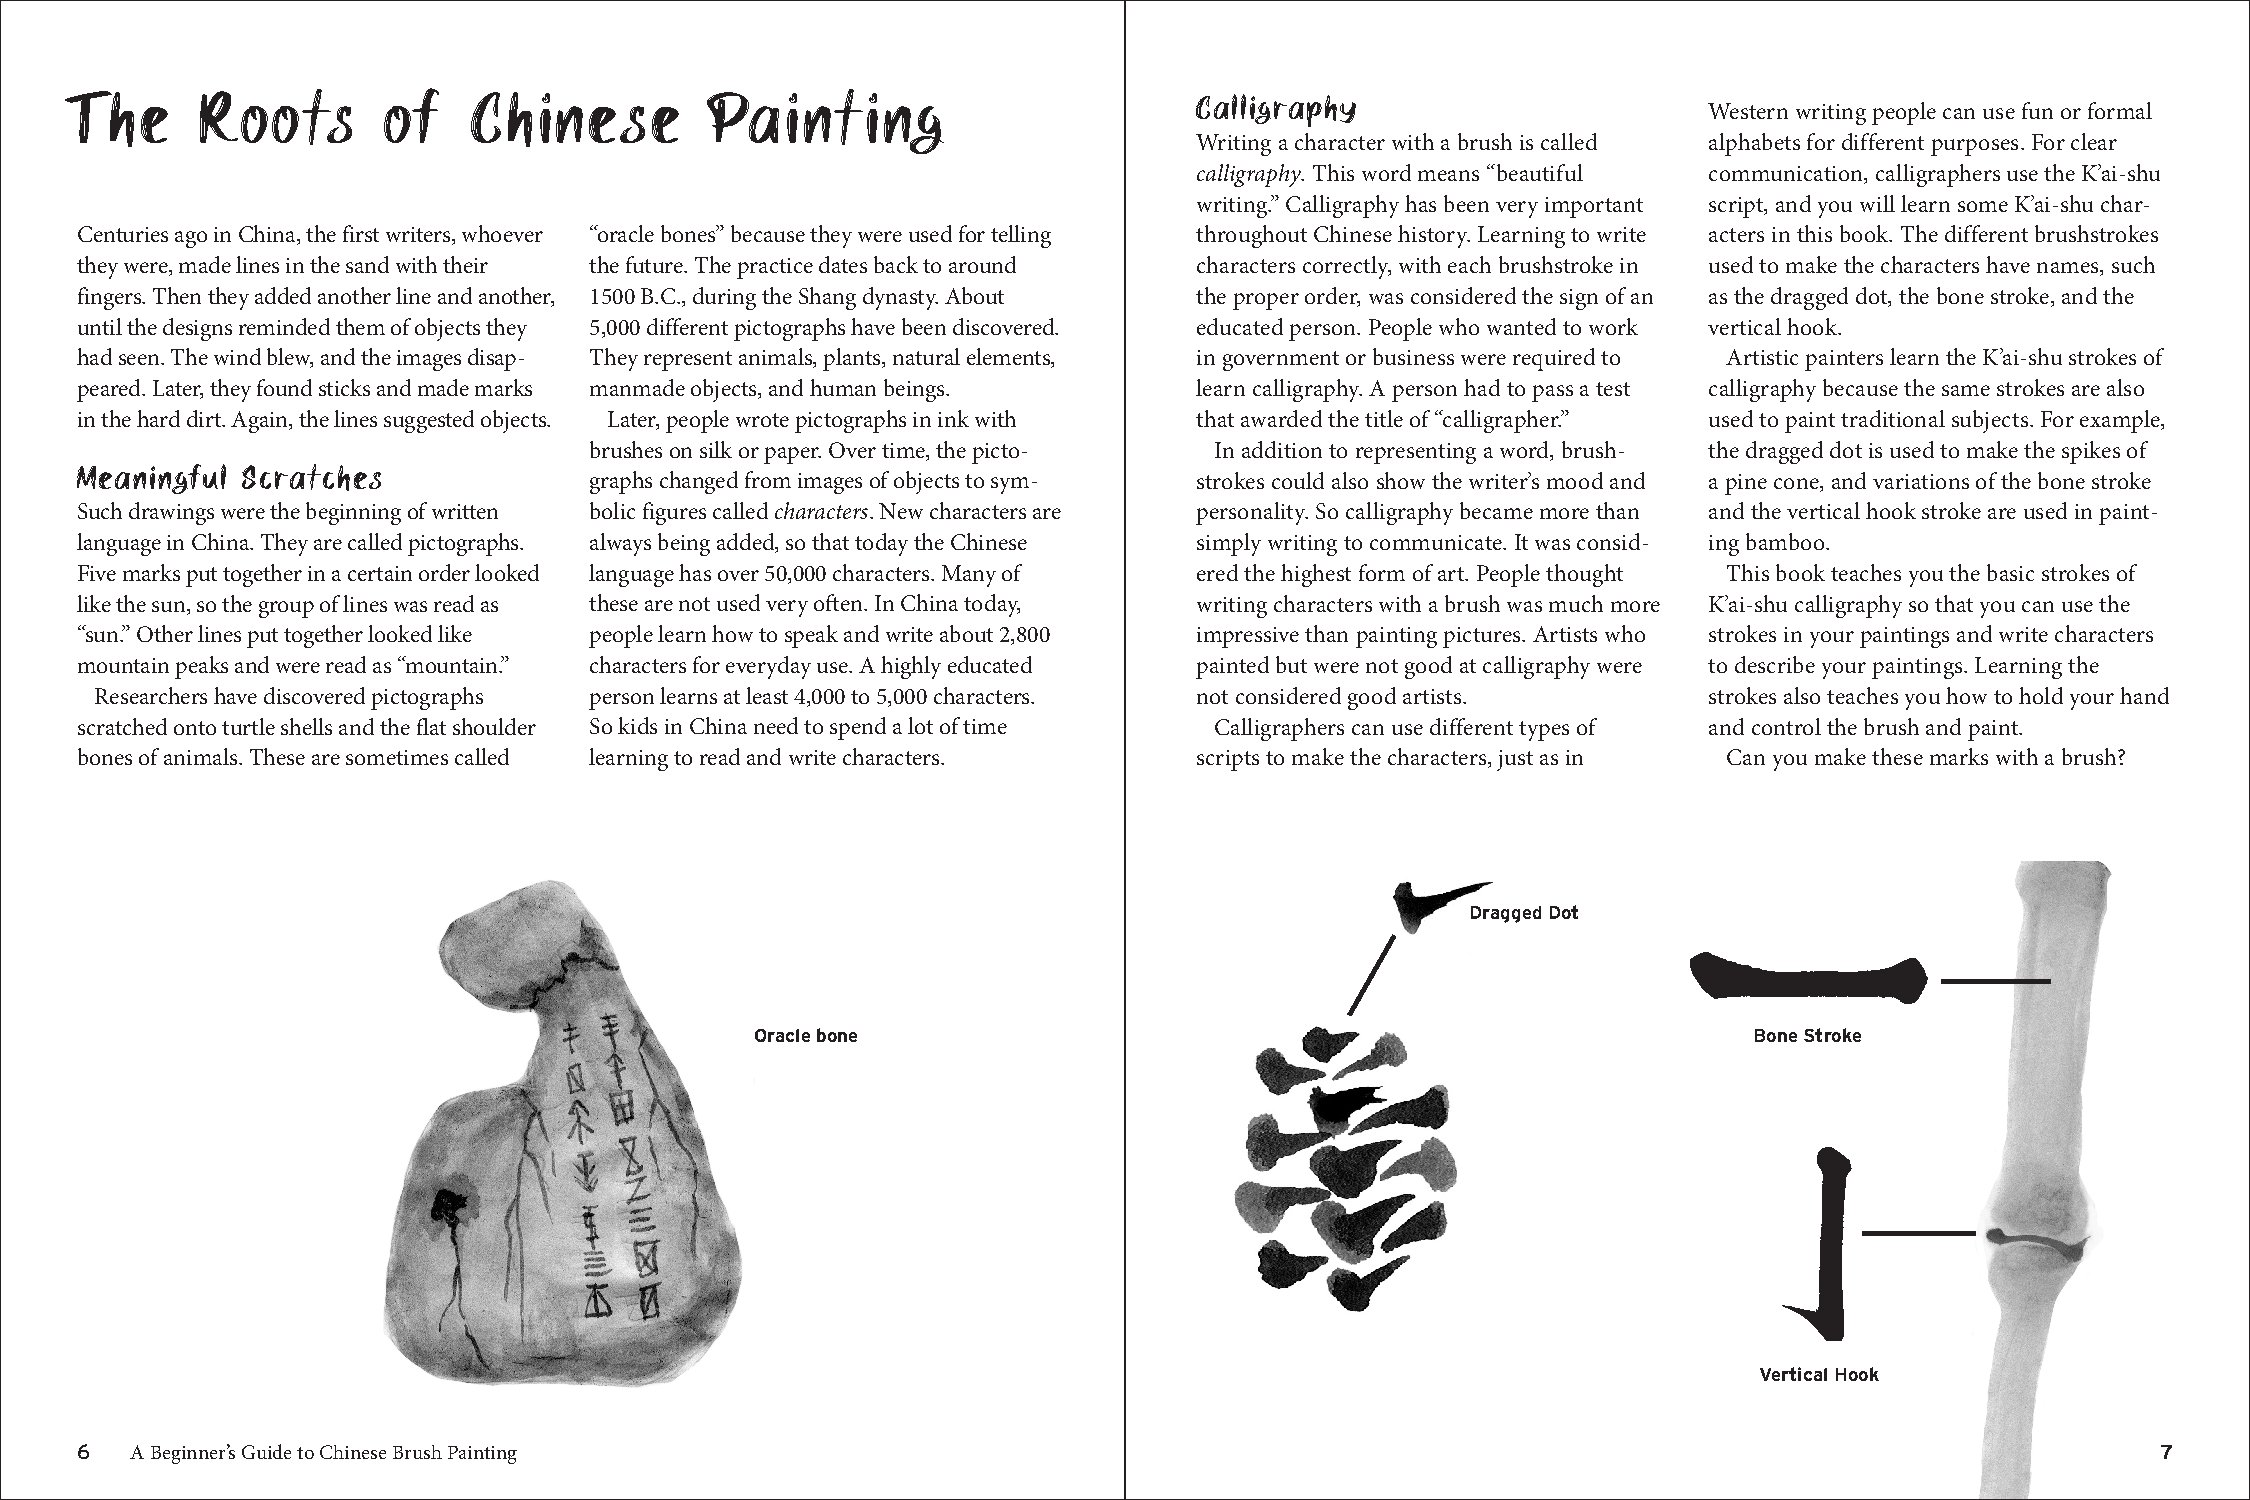 A Beginner's Guide to Chinese Brush Painting